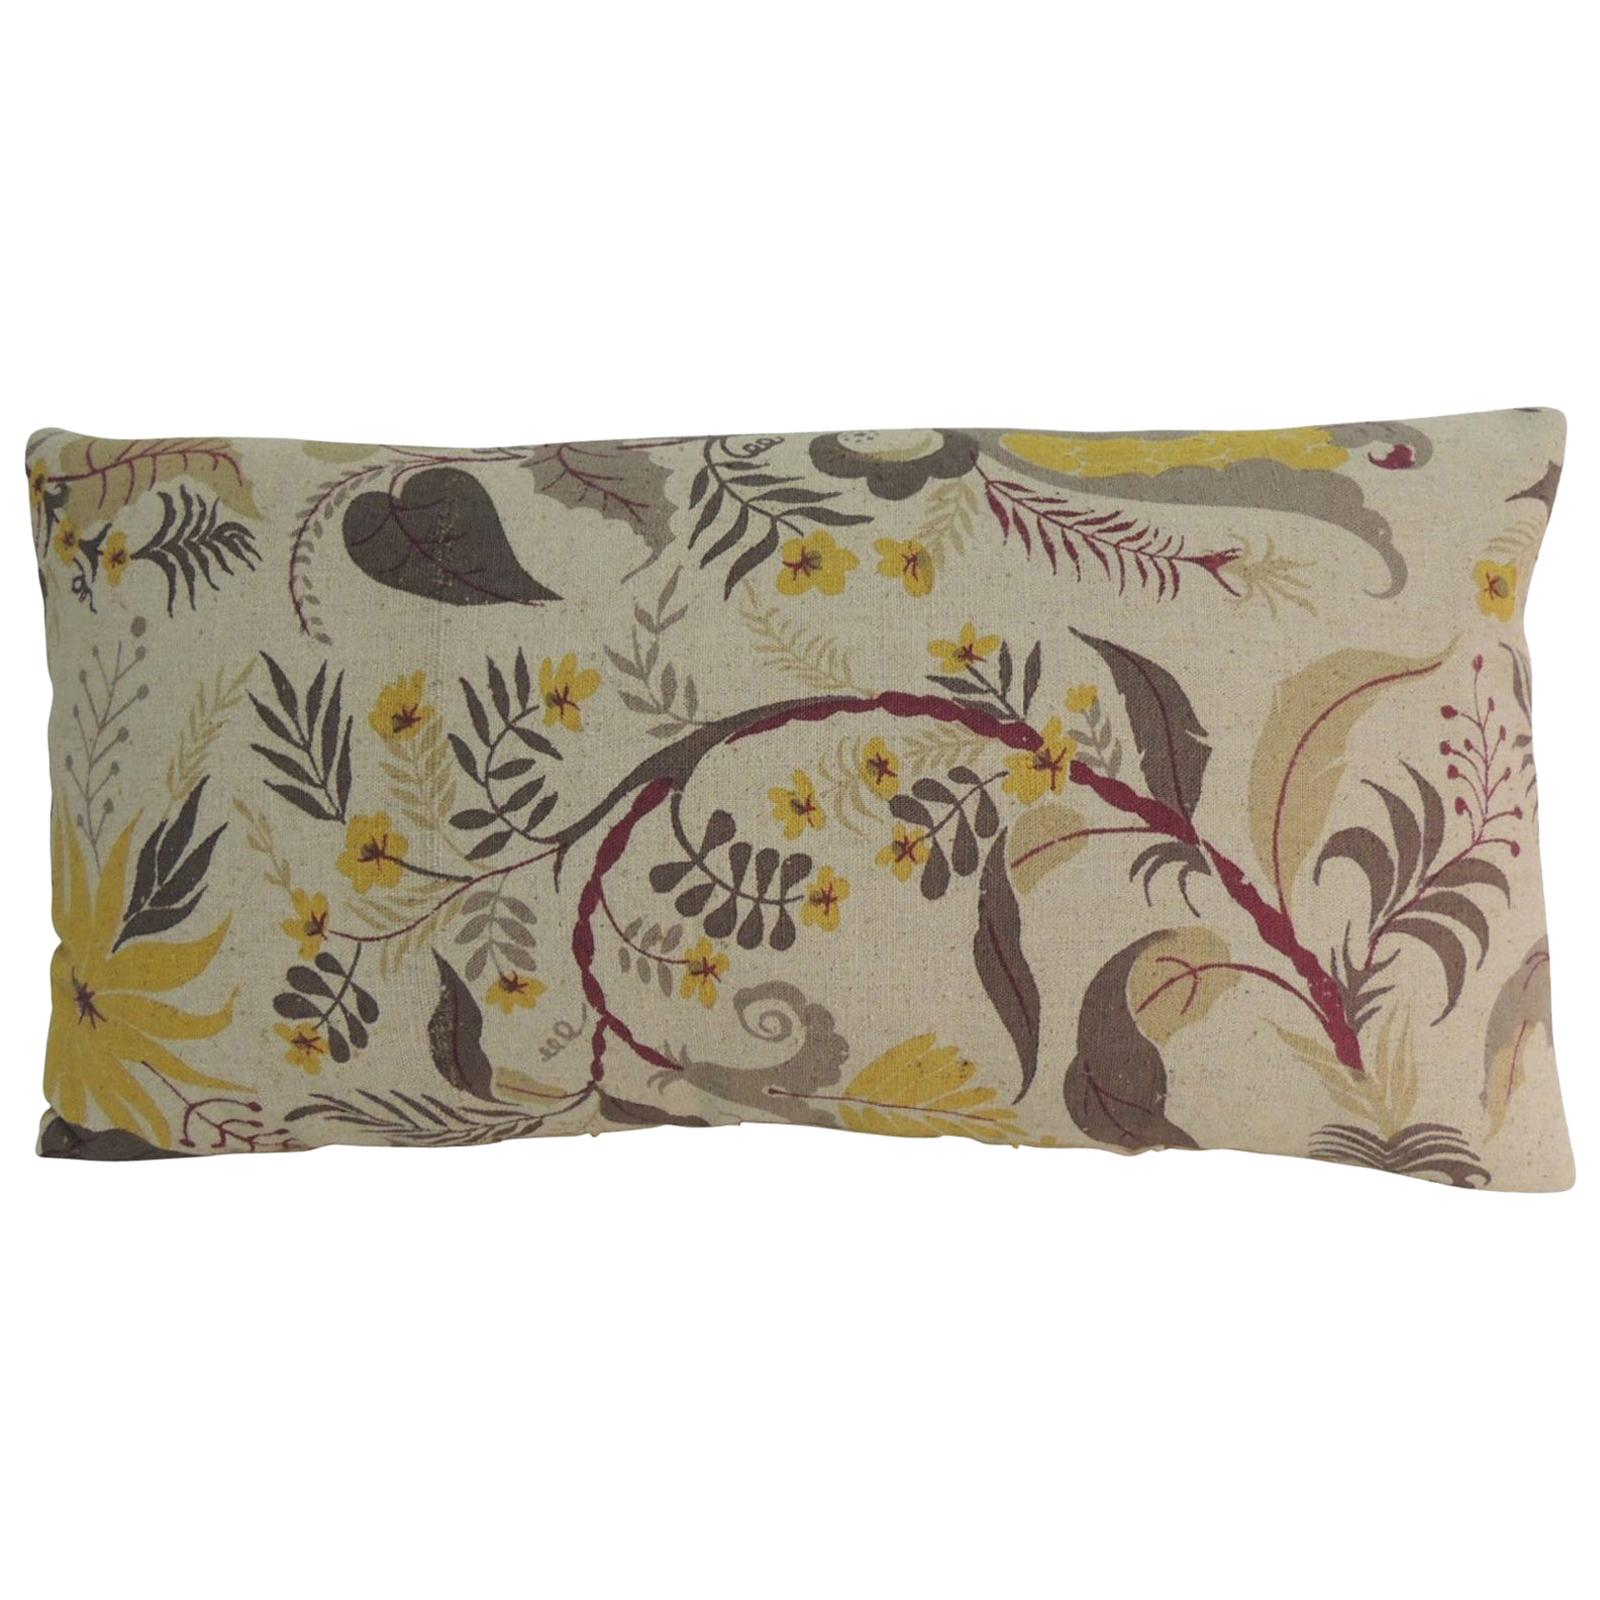 Vintage French Floral Printed Bolster Linen Decorative Bolster Pillow